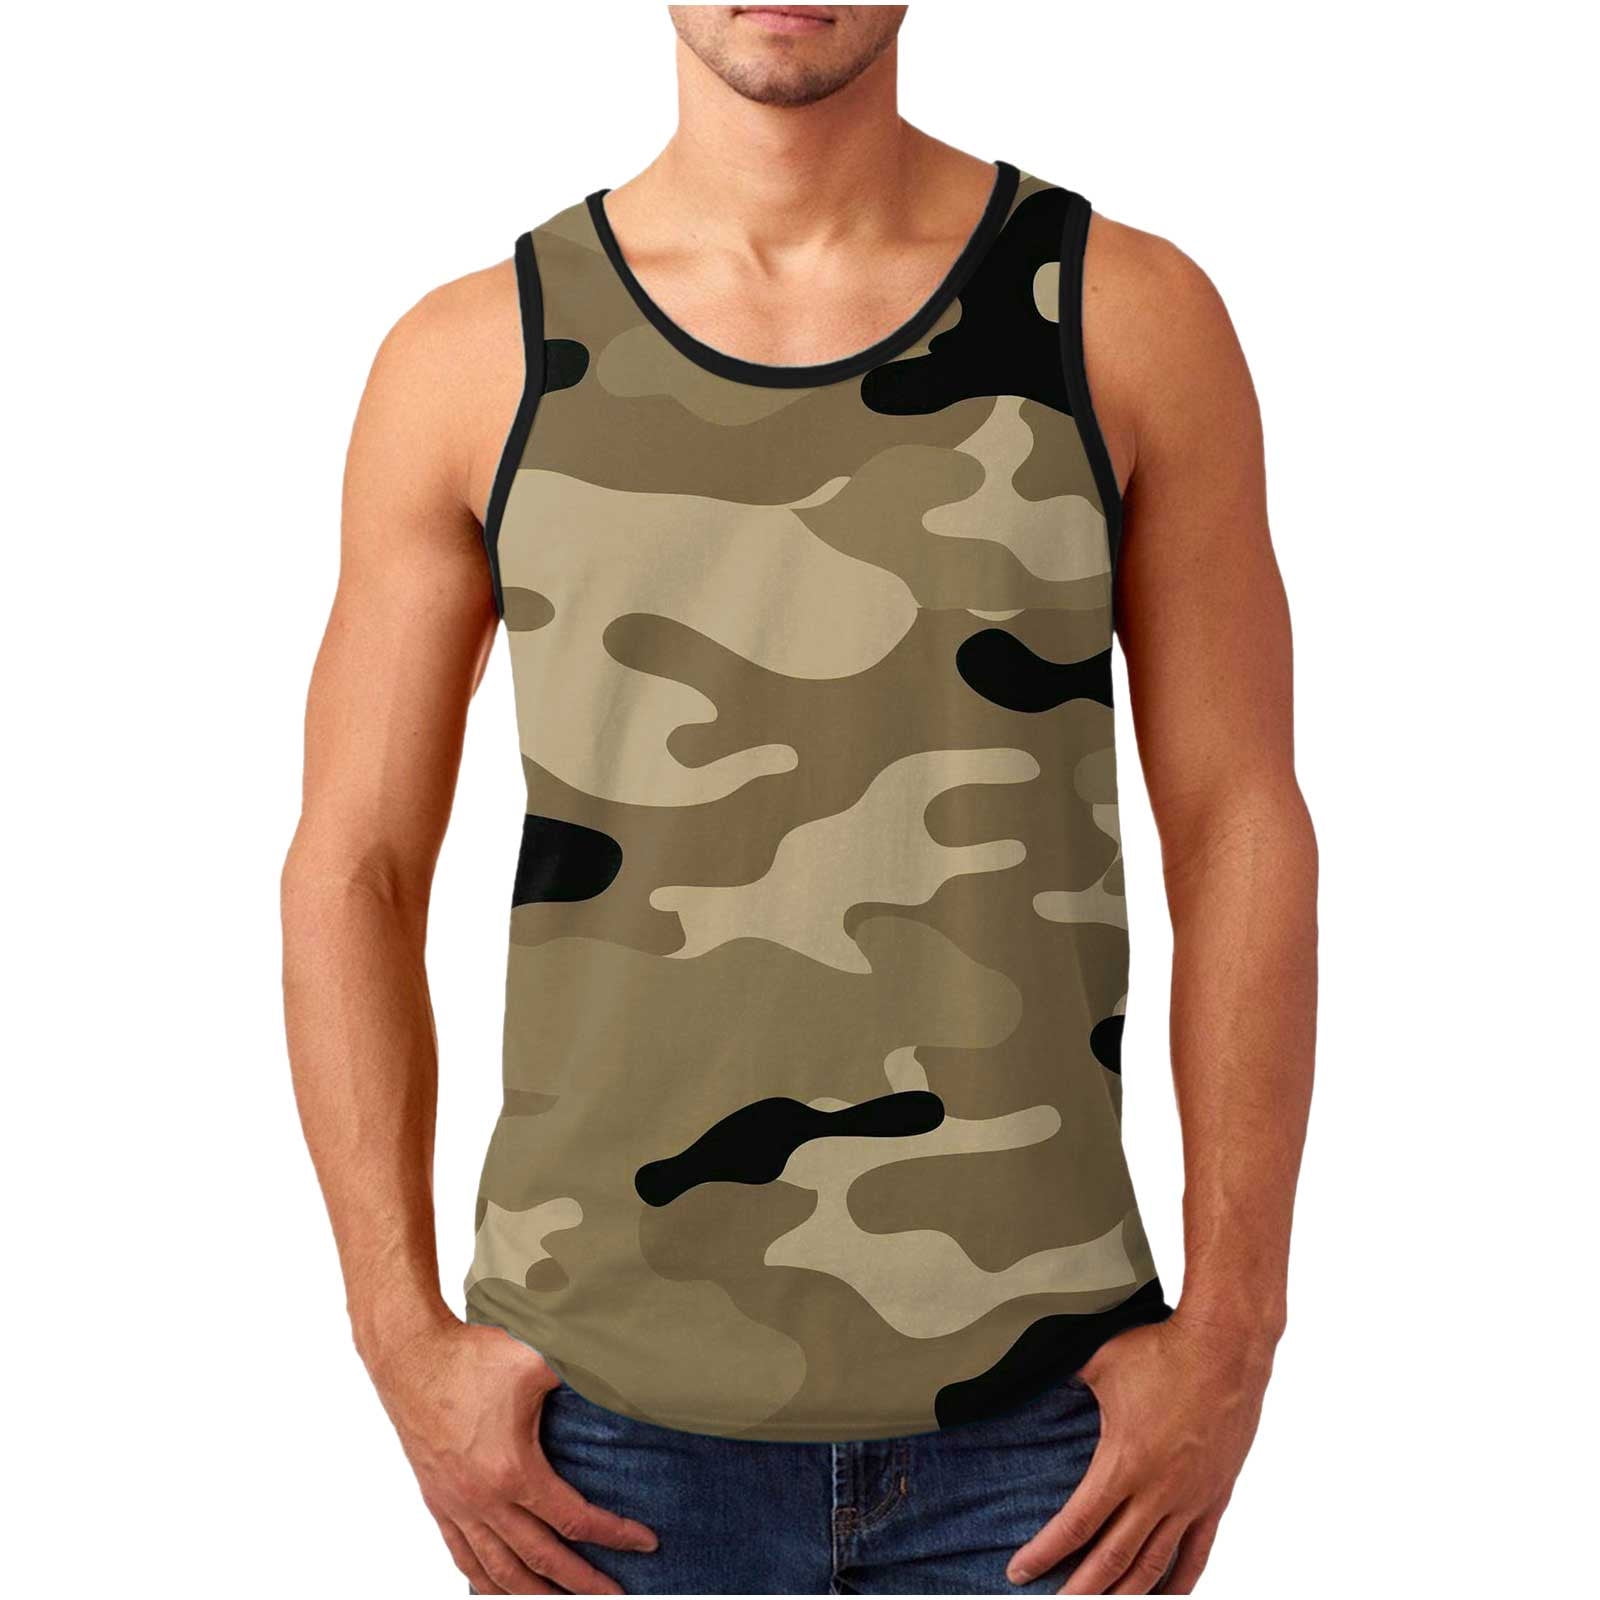 Men's Vest Tops Summer Camouflage Casual Vest Fashion Sleeveless Tops Workout 